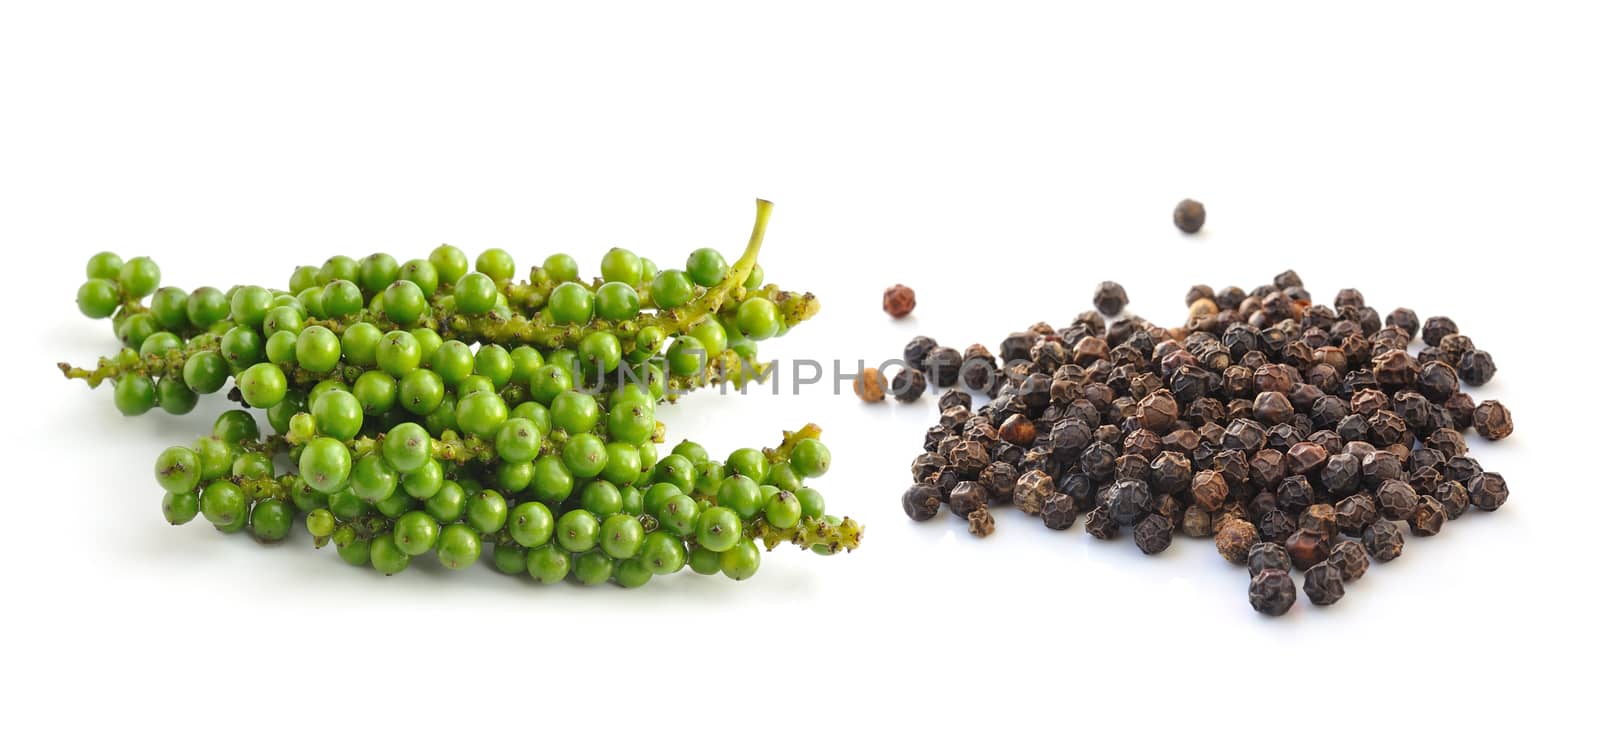 Bunches of fresh green pepper and Black peppercorn isolated on white background